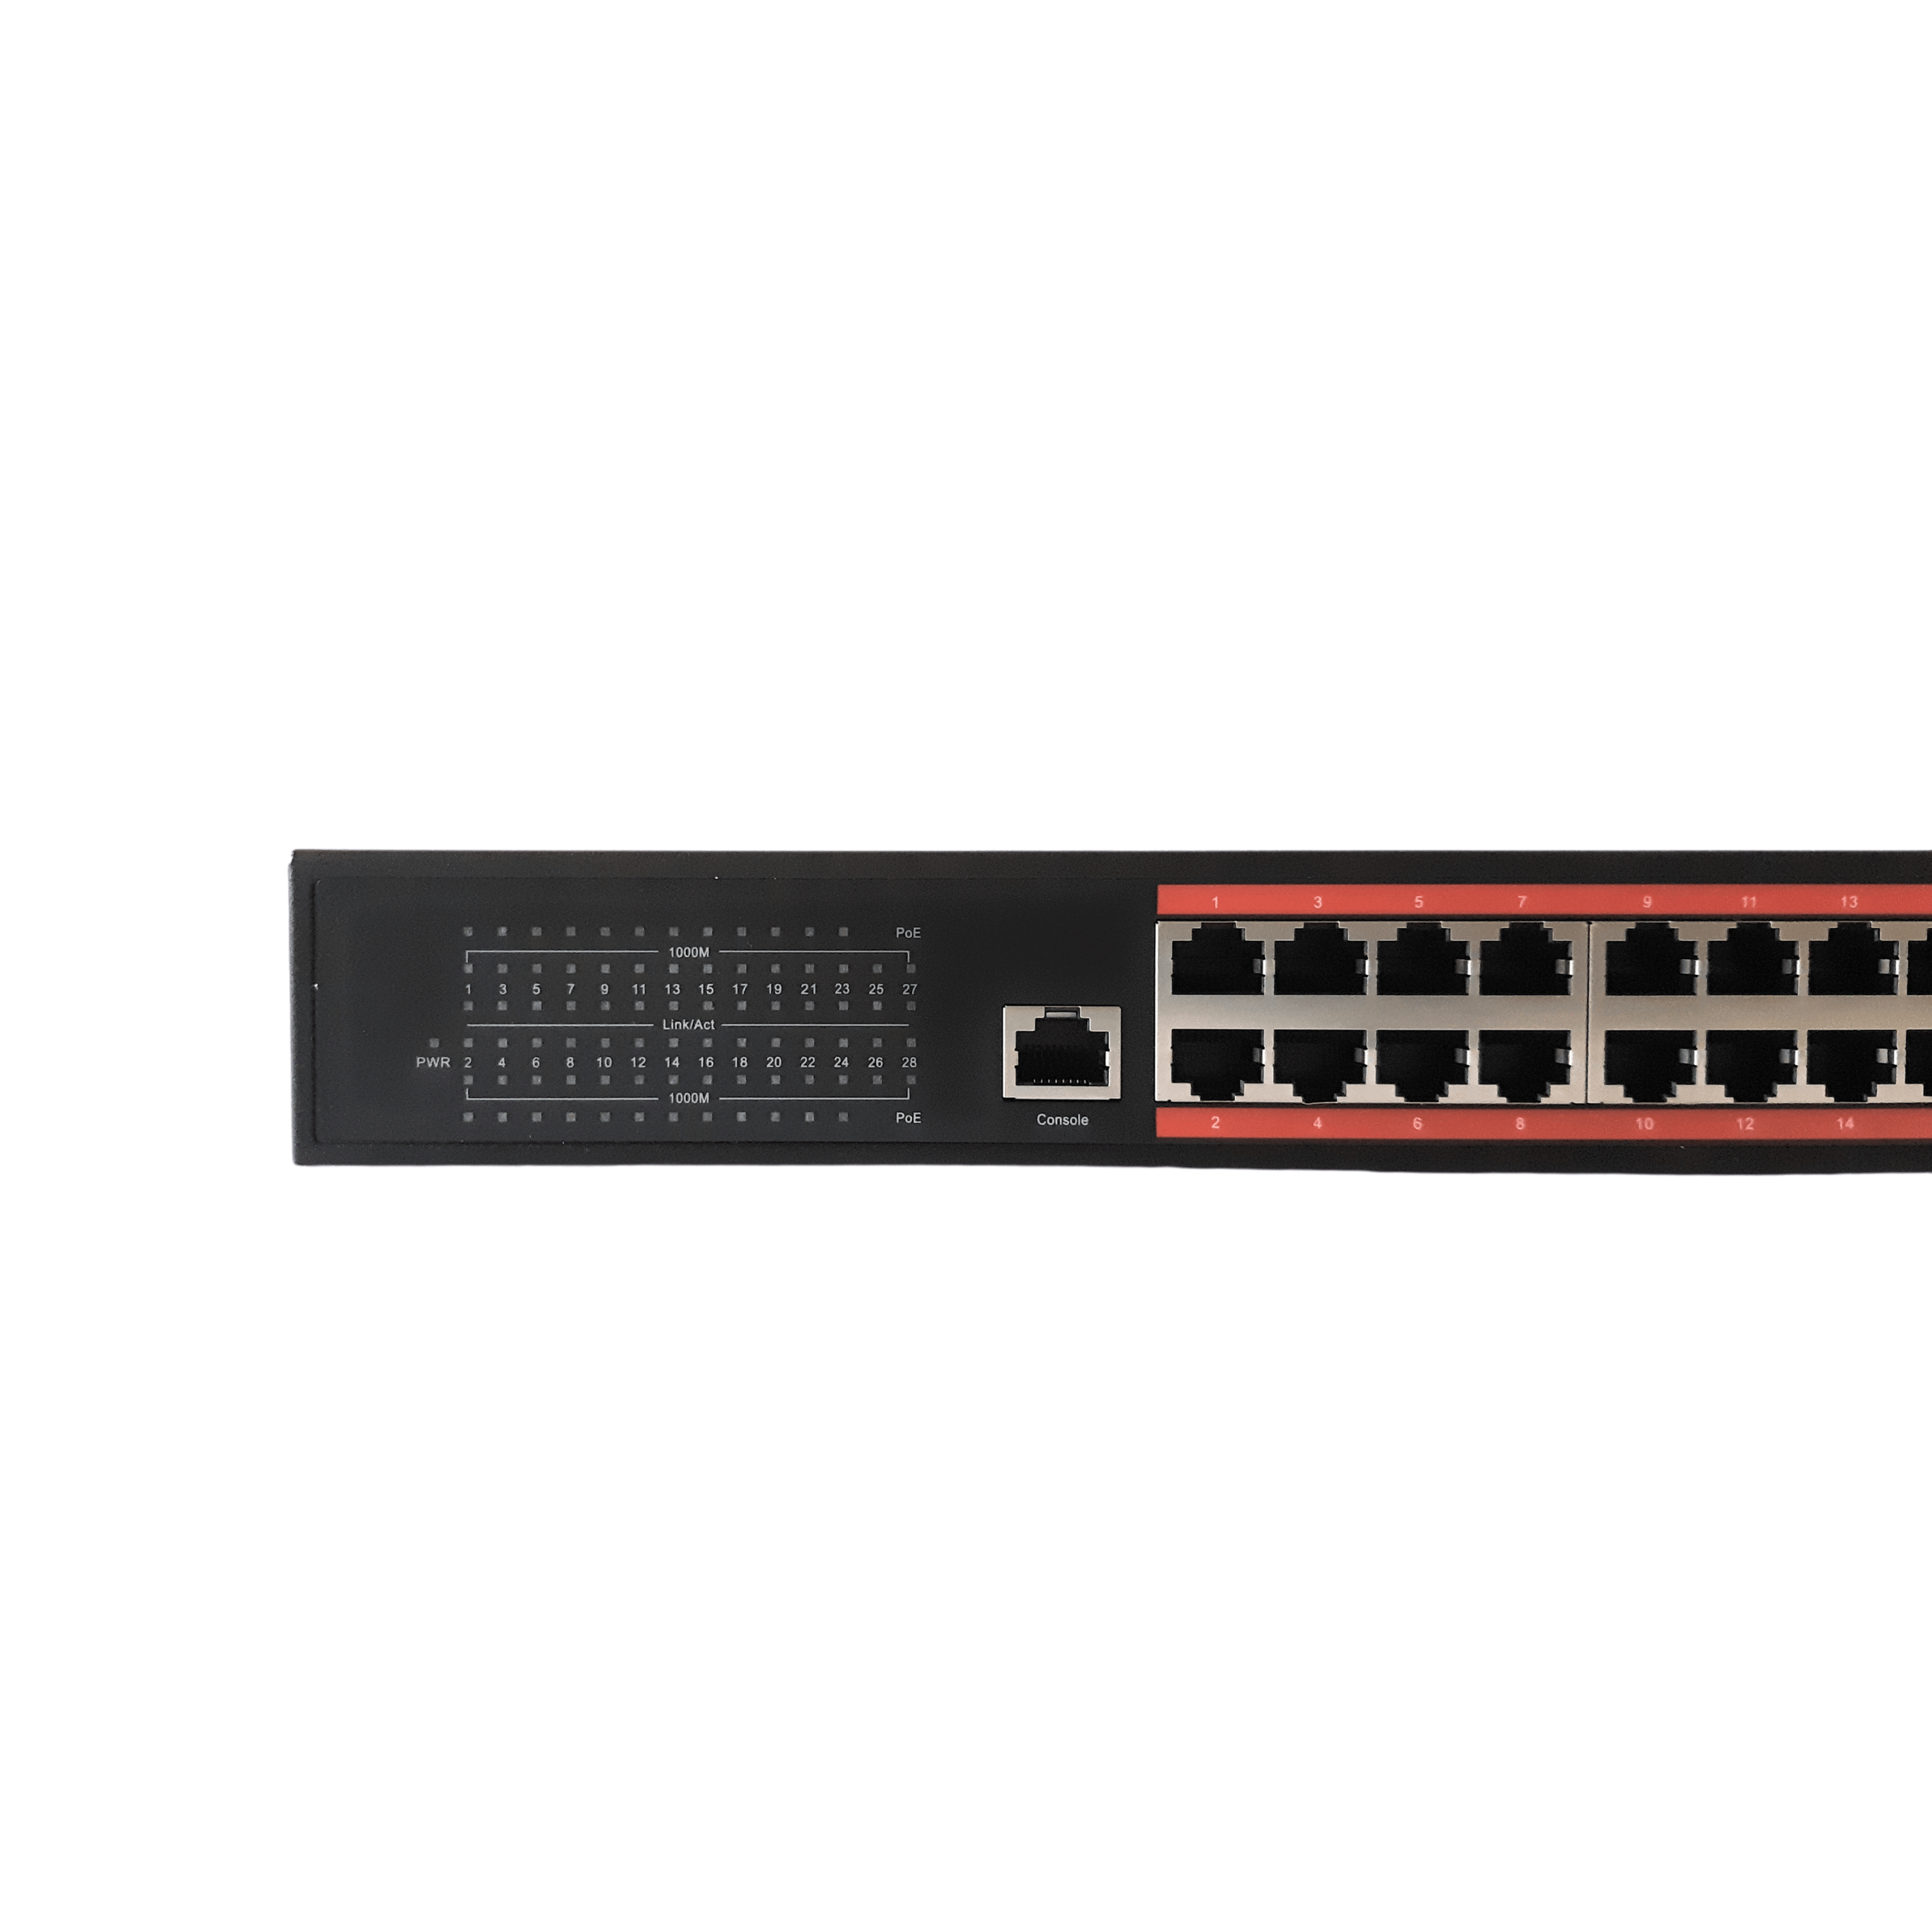 POE Texas Switch Fanless 24-Port Gigabit Layer 2 Managed IEEE 802.3bt Switch with 53V3000W Power Supply